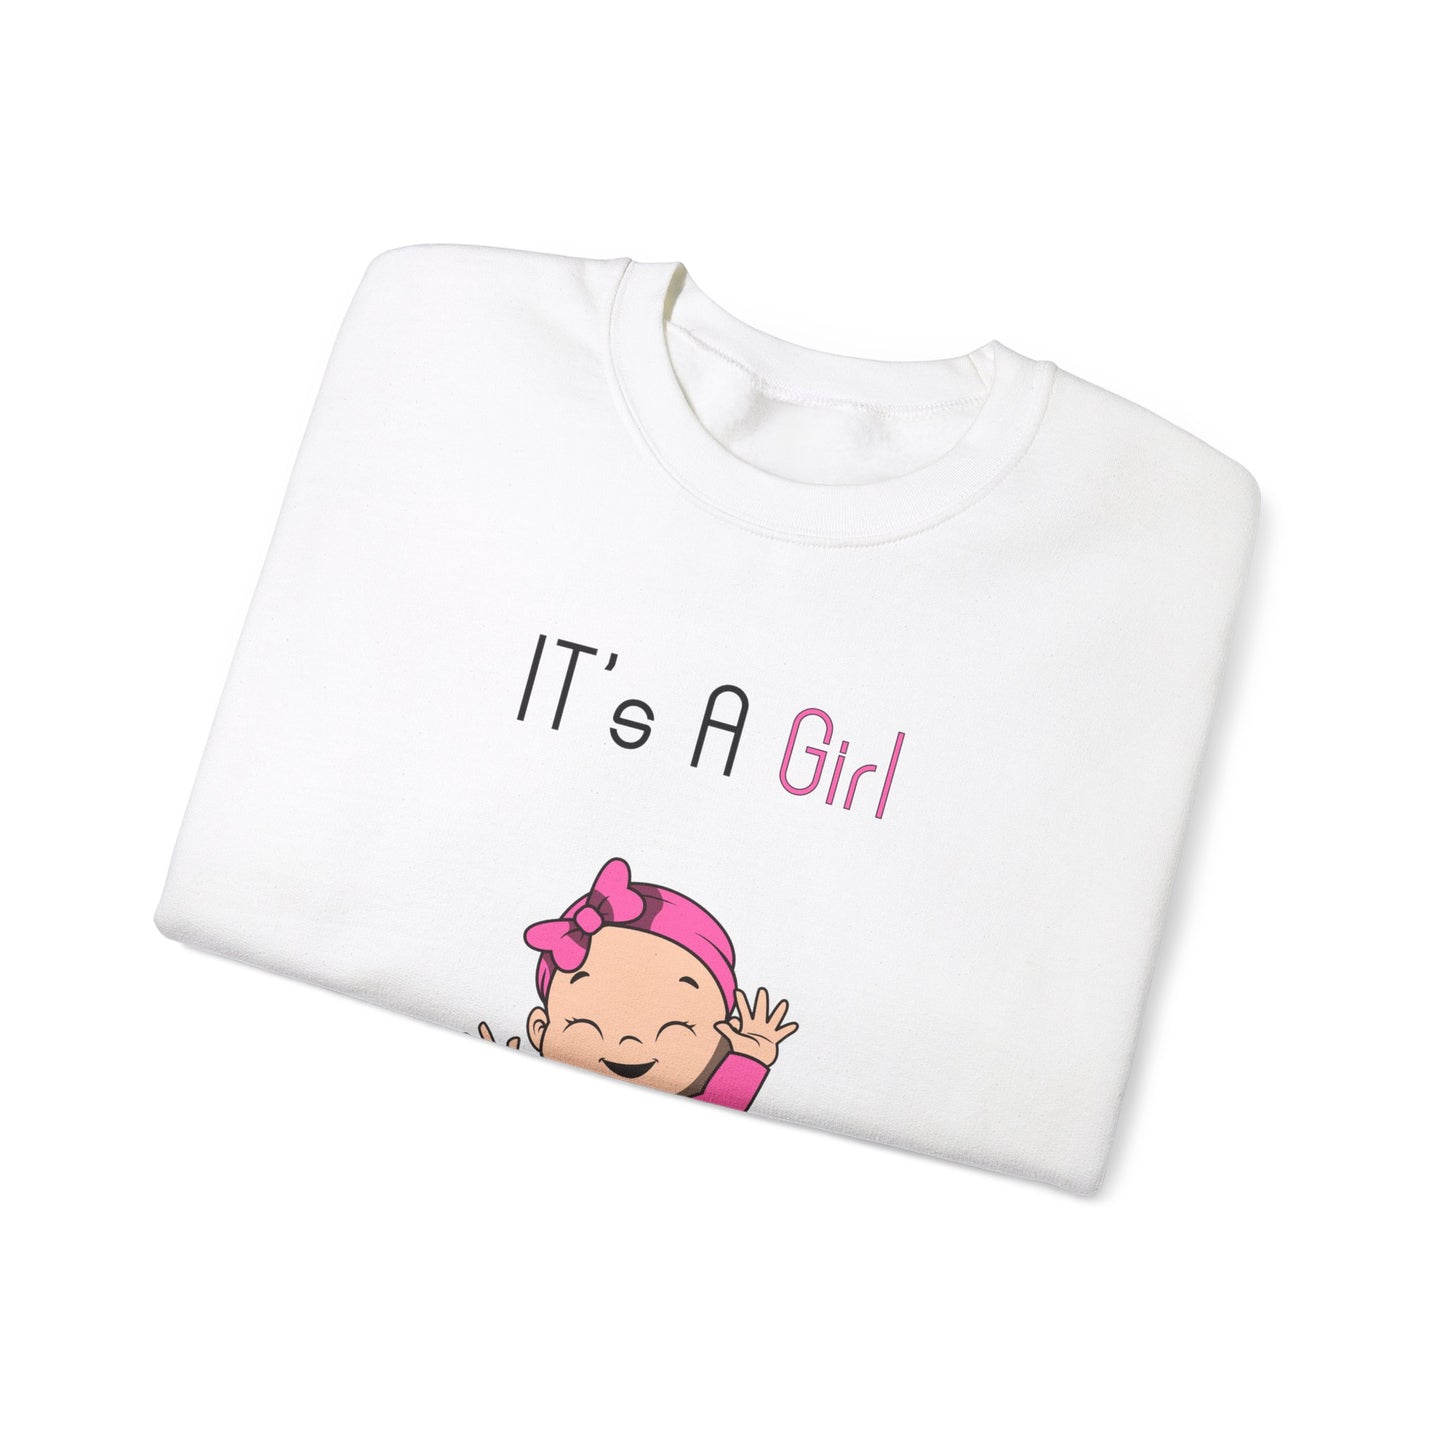 New Parent 'It's A Girl' Sweatshirt - Comfy Crewneck for Mom and Dad